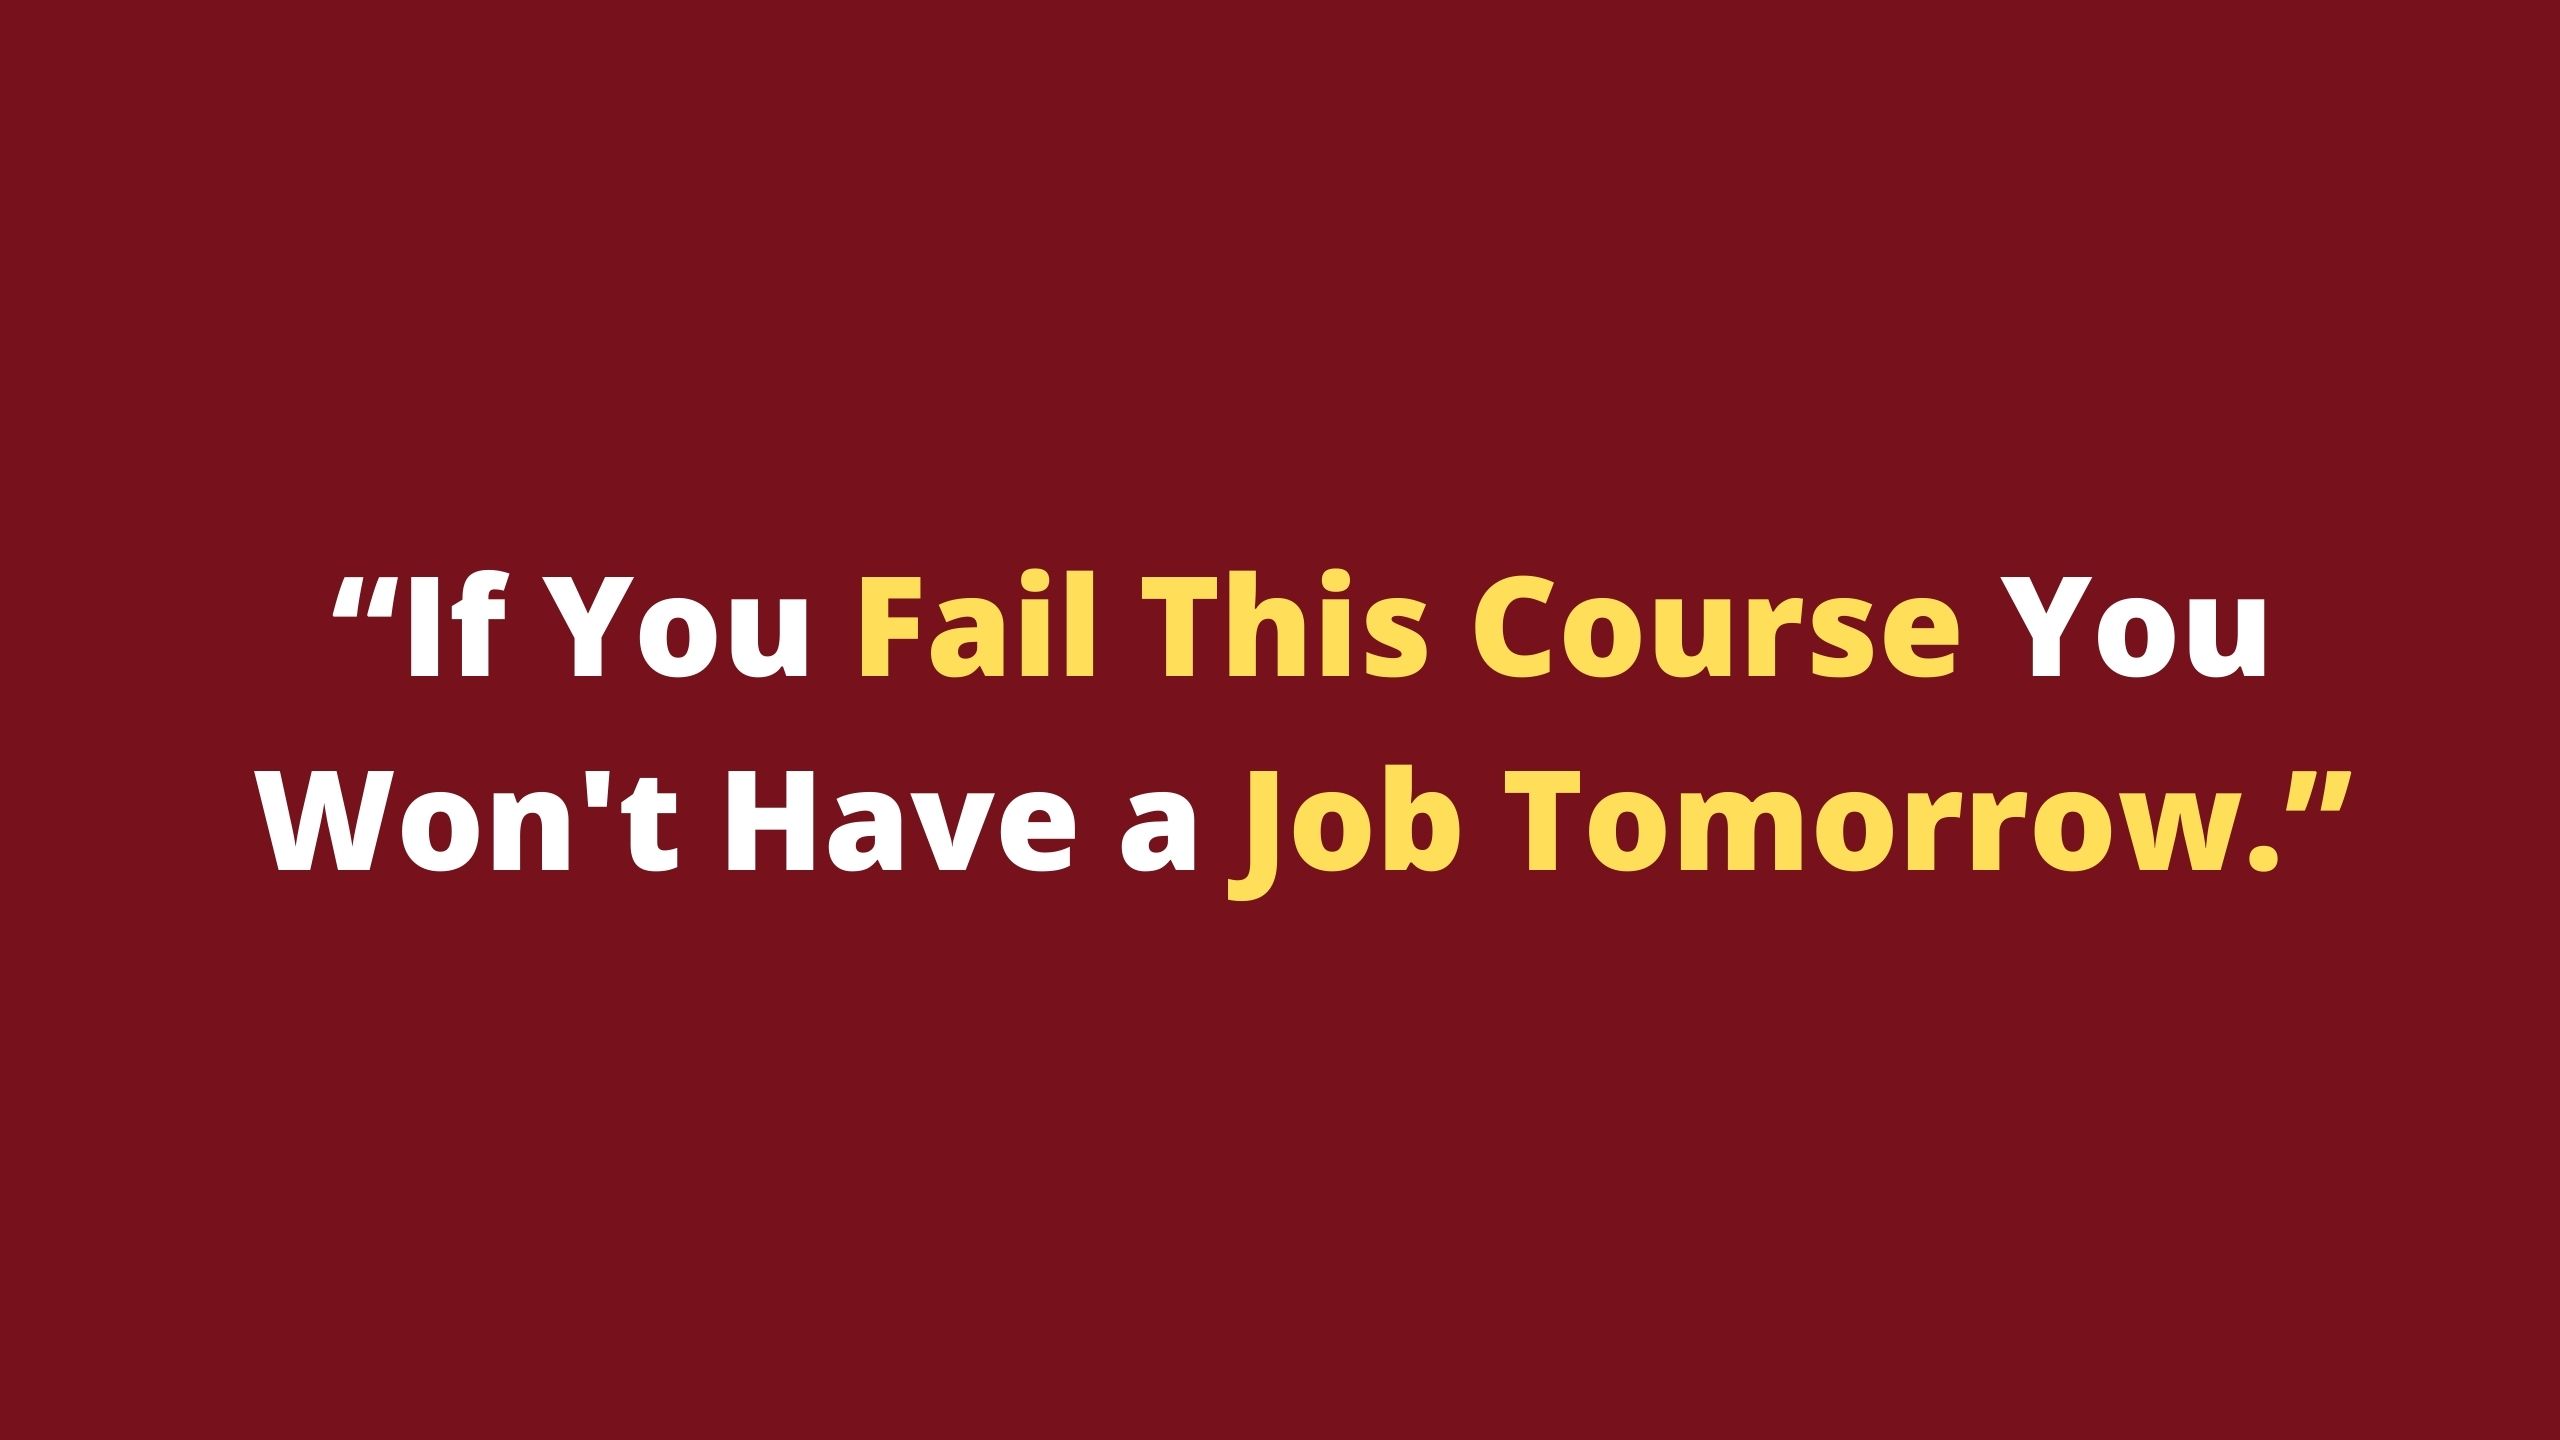 If You Fail This Course You Won't Have a Job Tomorrow